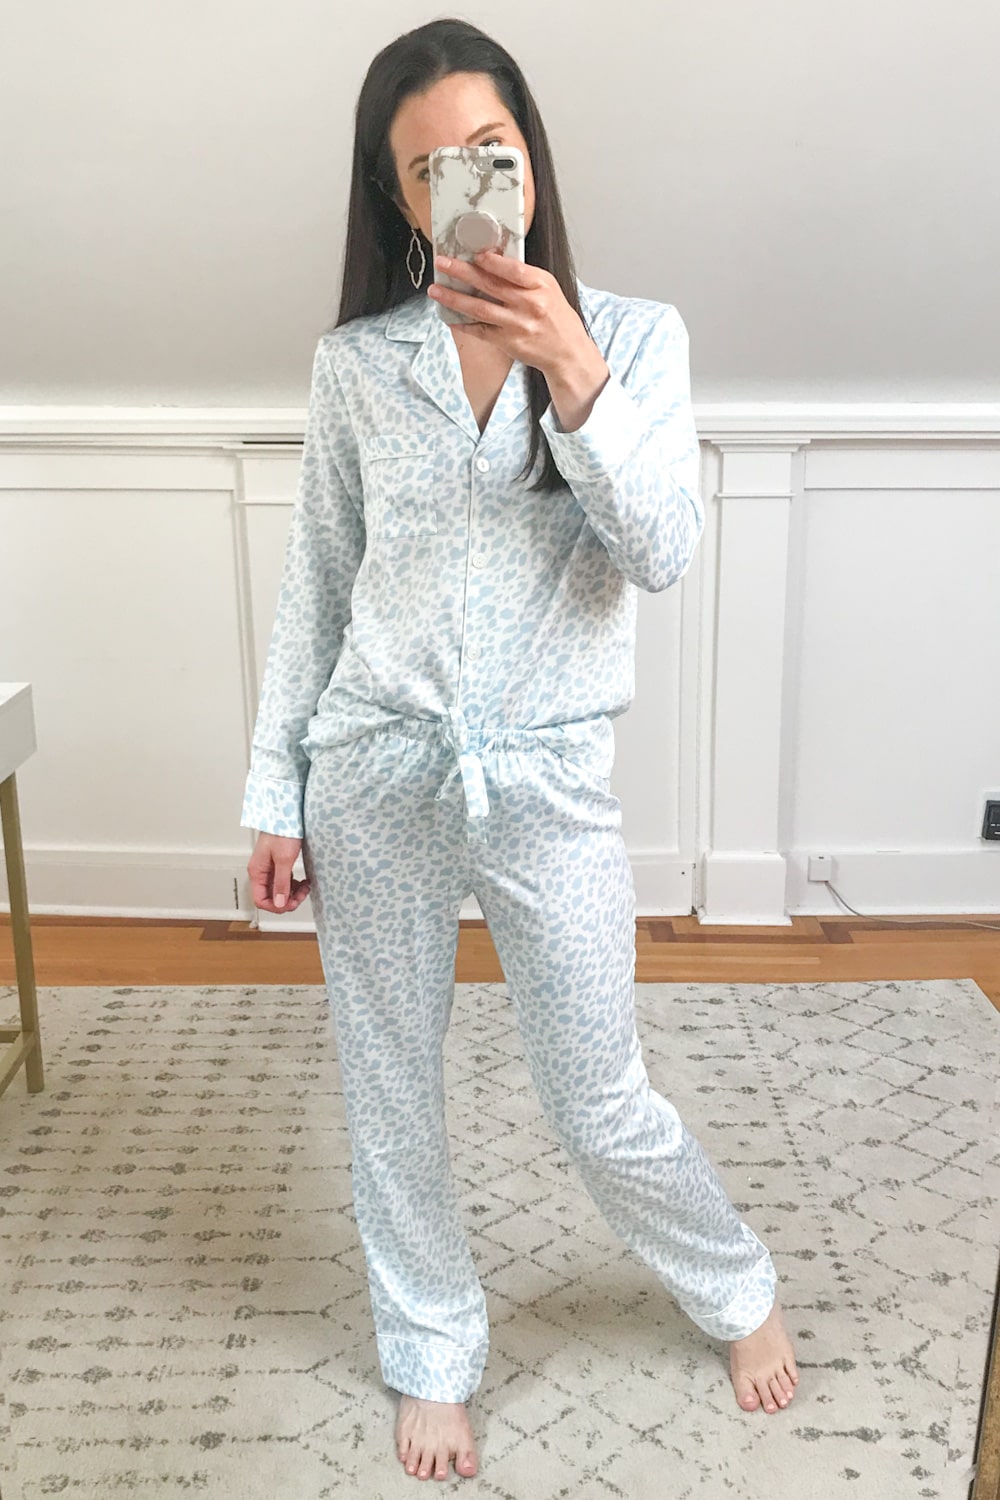 Amazon Serenedelicacy blue leopard print silk pajama set tried on by affordable fashion blogger Stephanie Ziajka on Diary of a Debutante